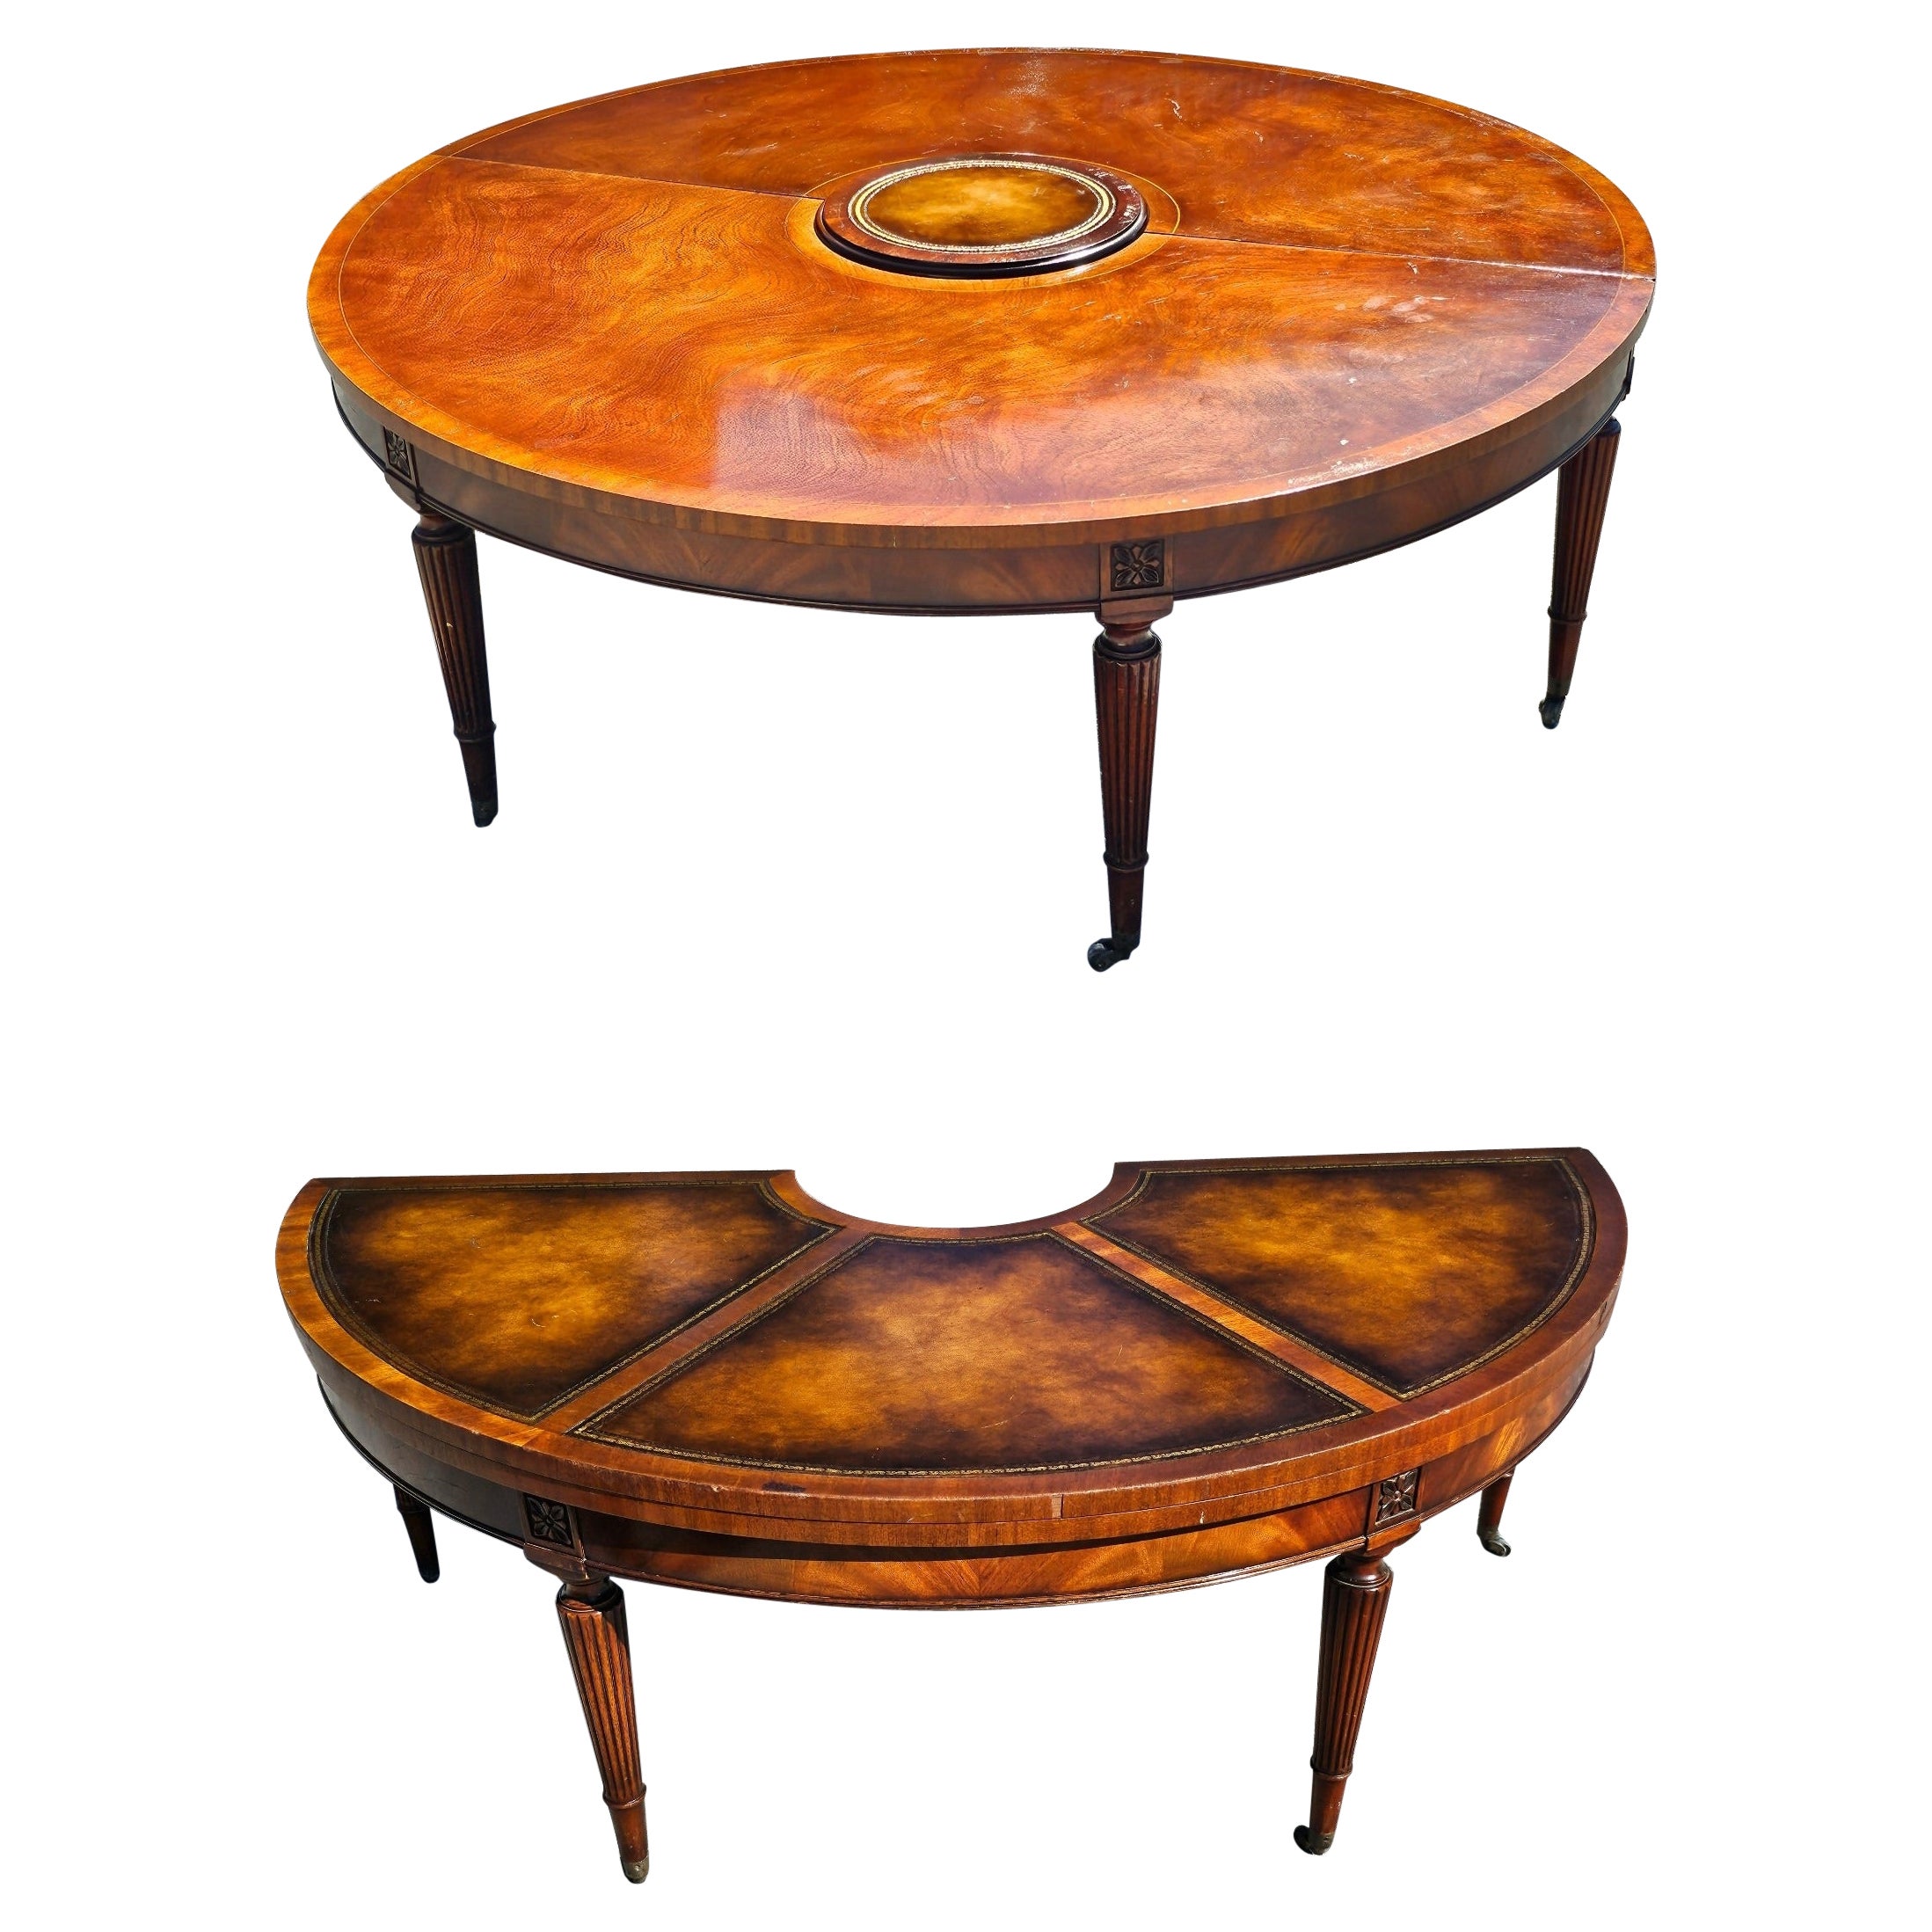 1940s Weiman Regency Tooled Leather Mahogany Convertible Demilune Cocktail Table For Sale